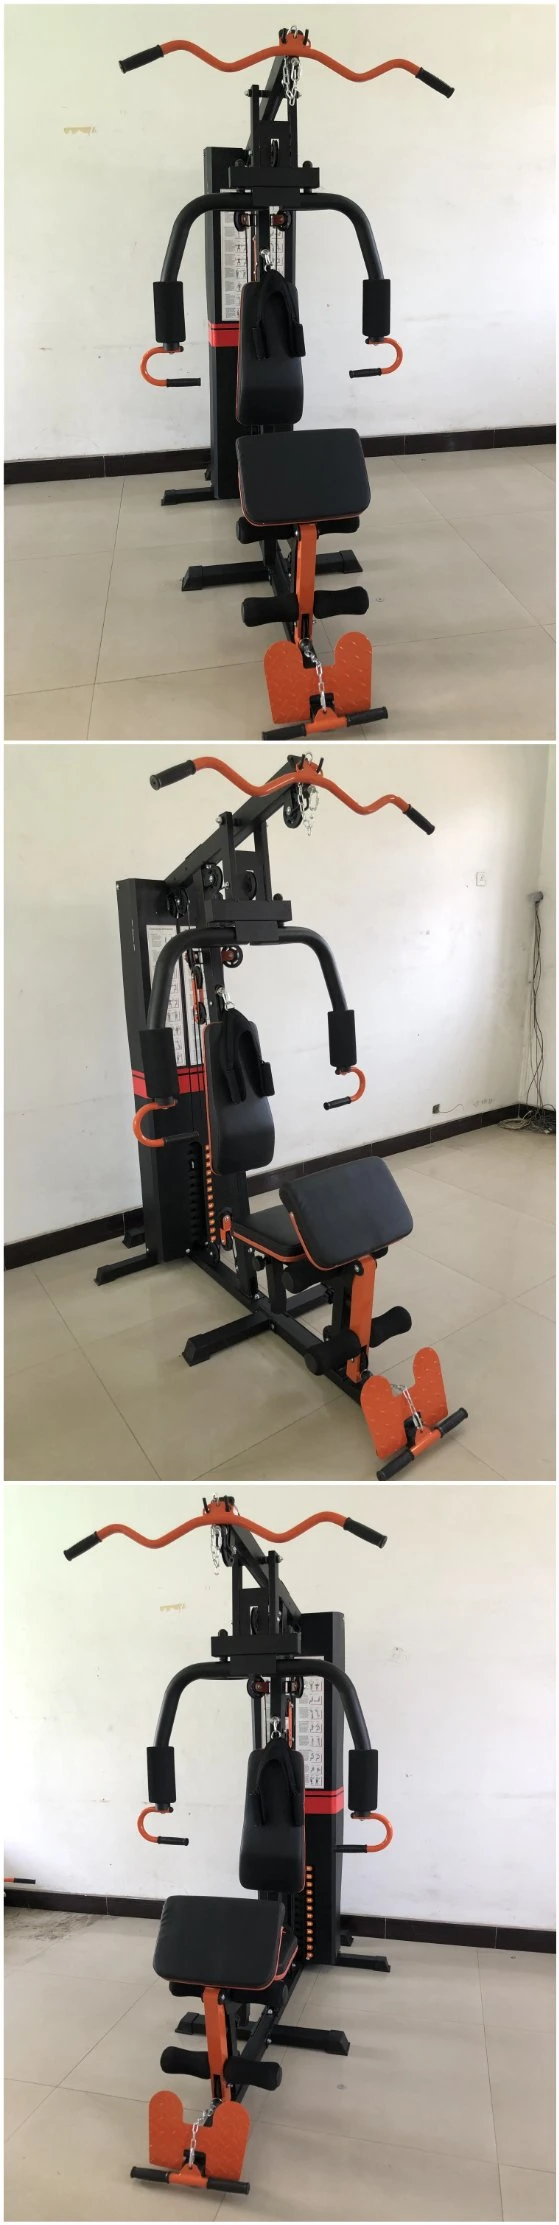 Commercial Multifunctional Gym Machine for Chest Trainging Arm Exercise Single Station Home Gym